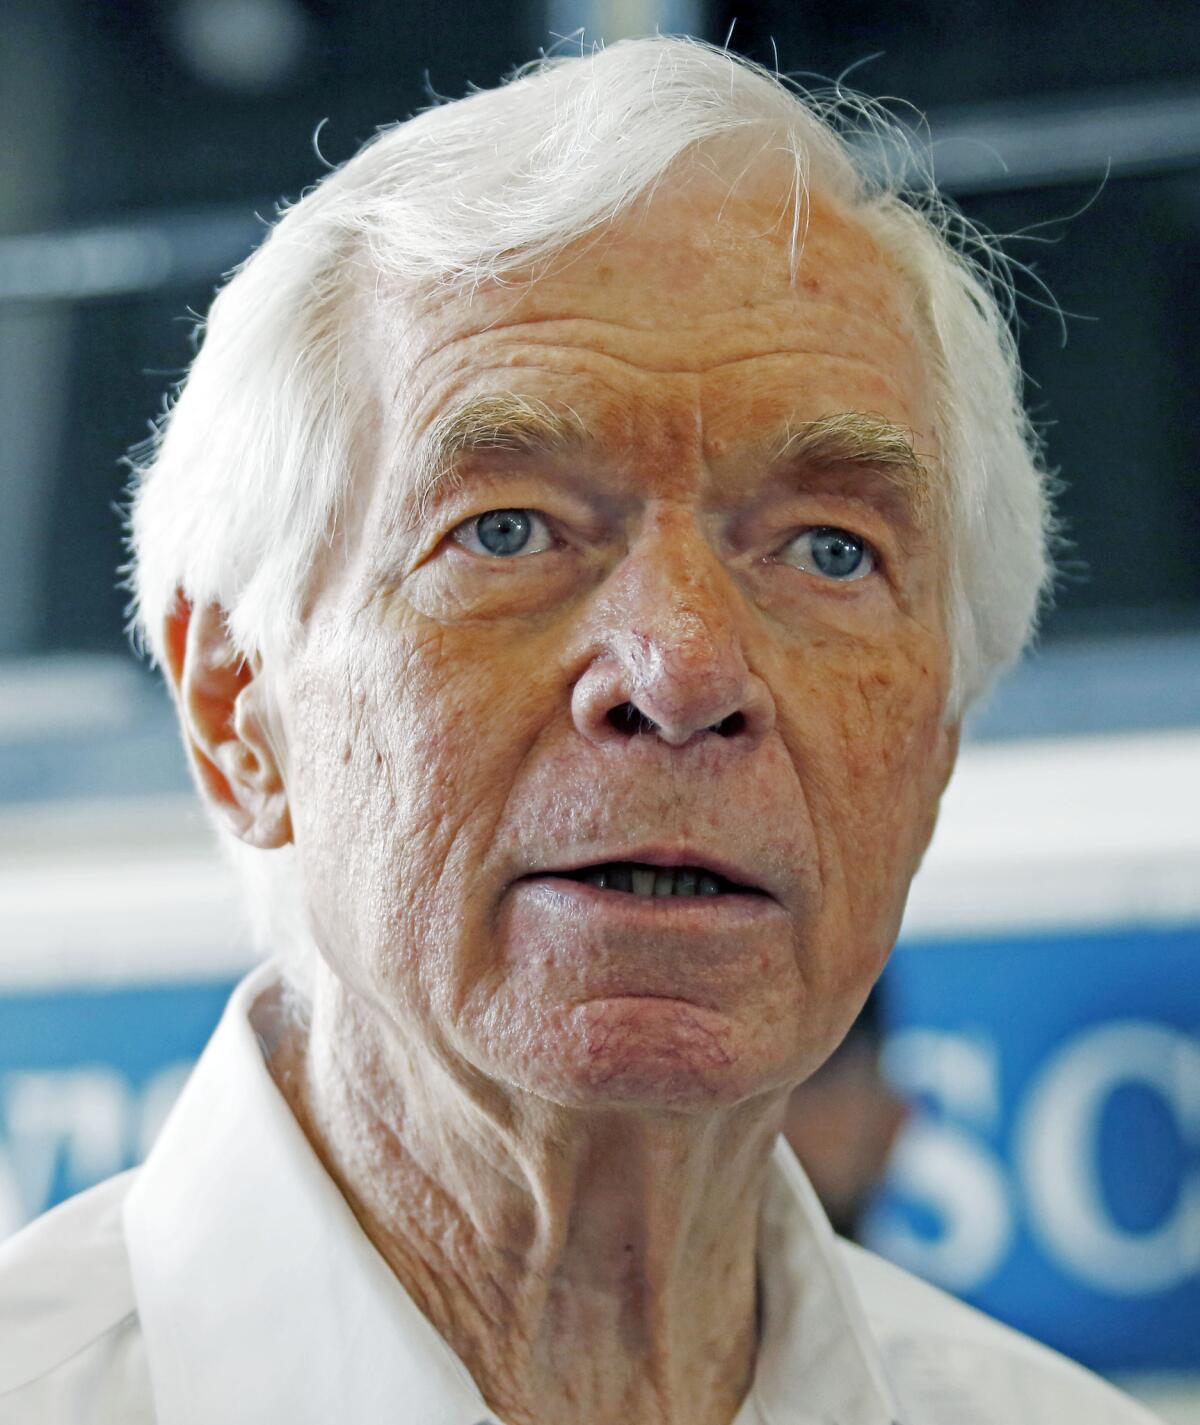 Veteran Mississippi Sen. Thad Cochran will be the next candidate to test the strength of the GOP establishment. He faces a June 24 runoff against tea party insurgent Chris McDaniel.